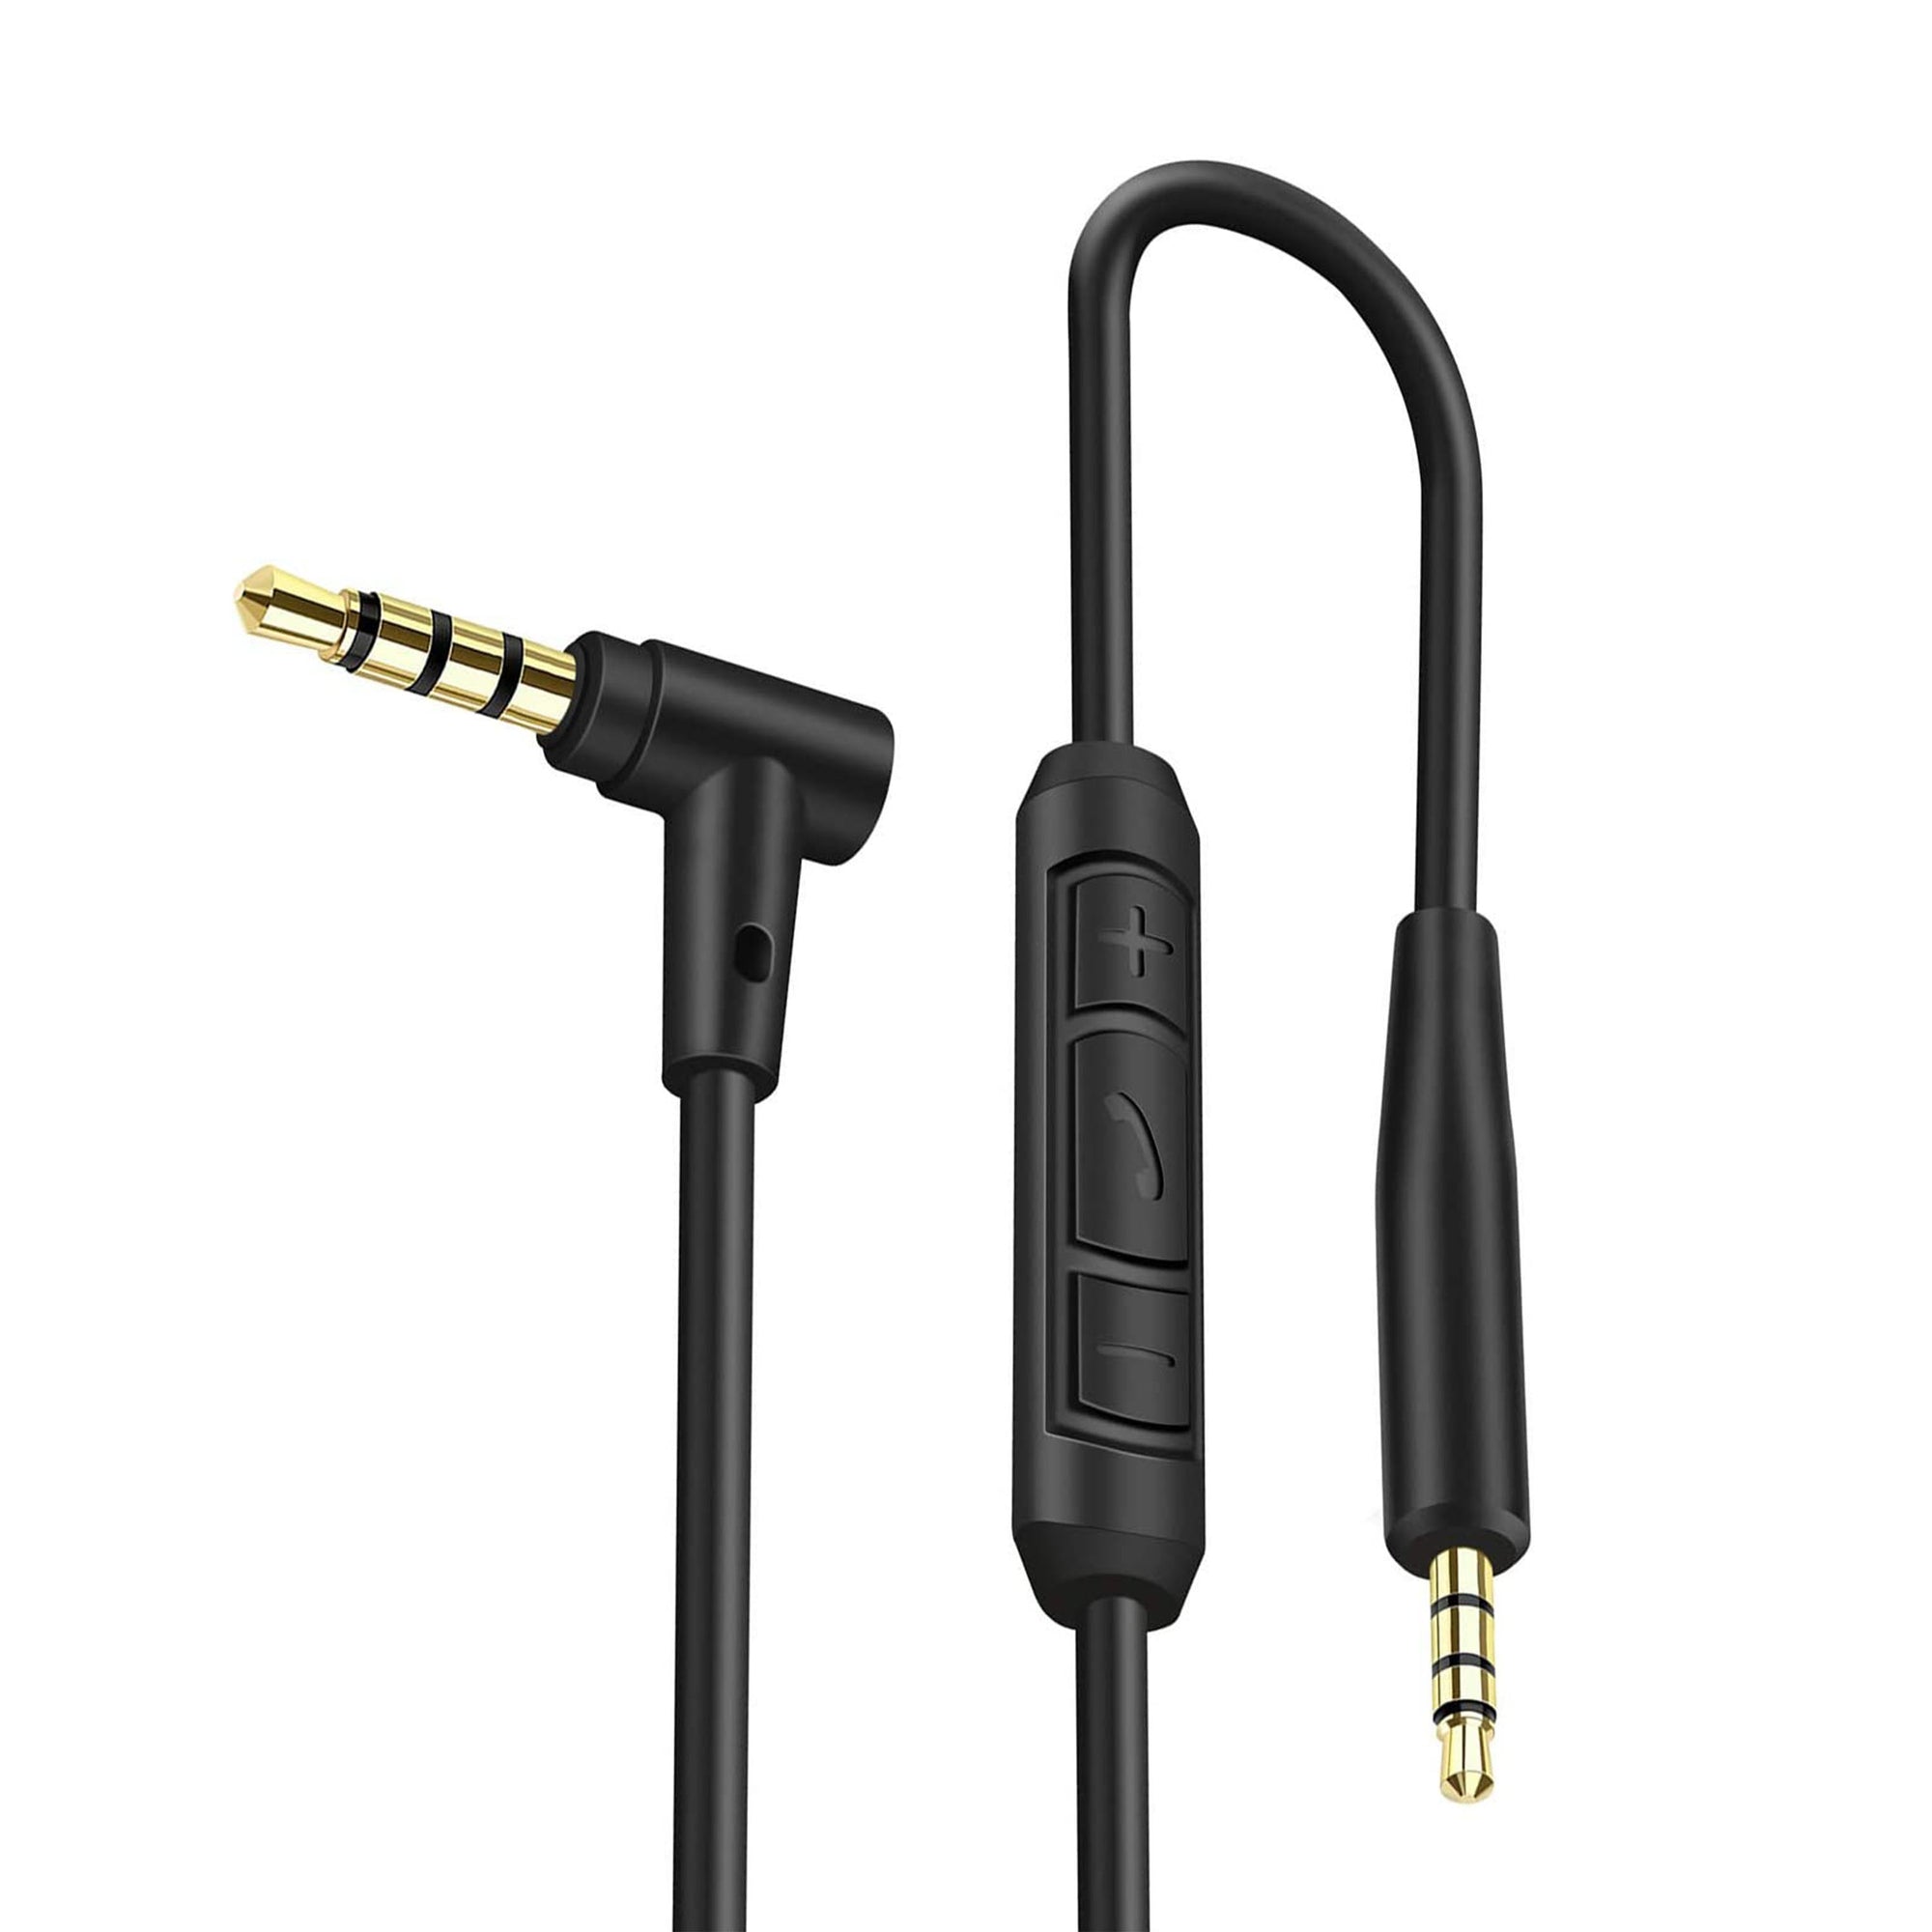 Replacement Audio Cable for BOSE NC700 QC25 QC35 QC45 Headphones with in-line Mic & Remote Control, 1.5mt / 59”